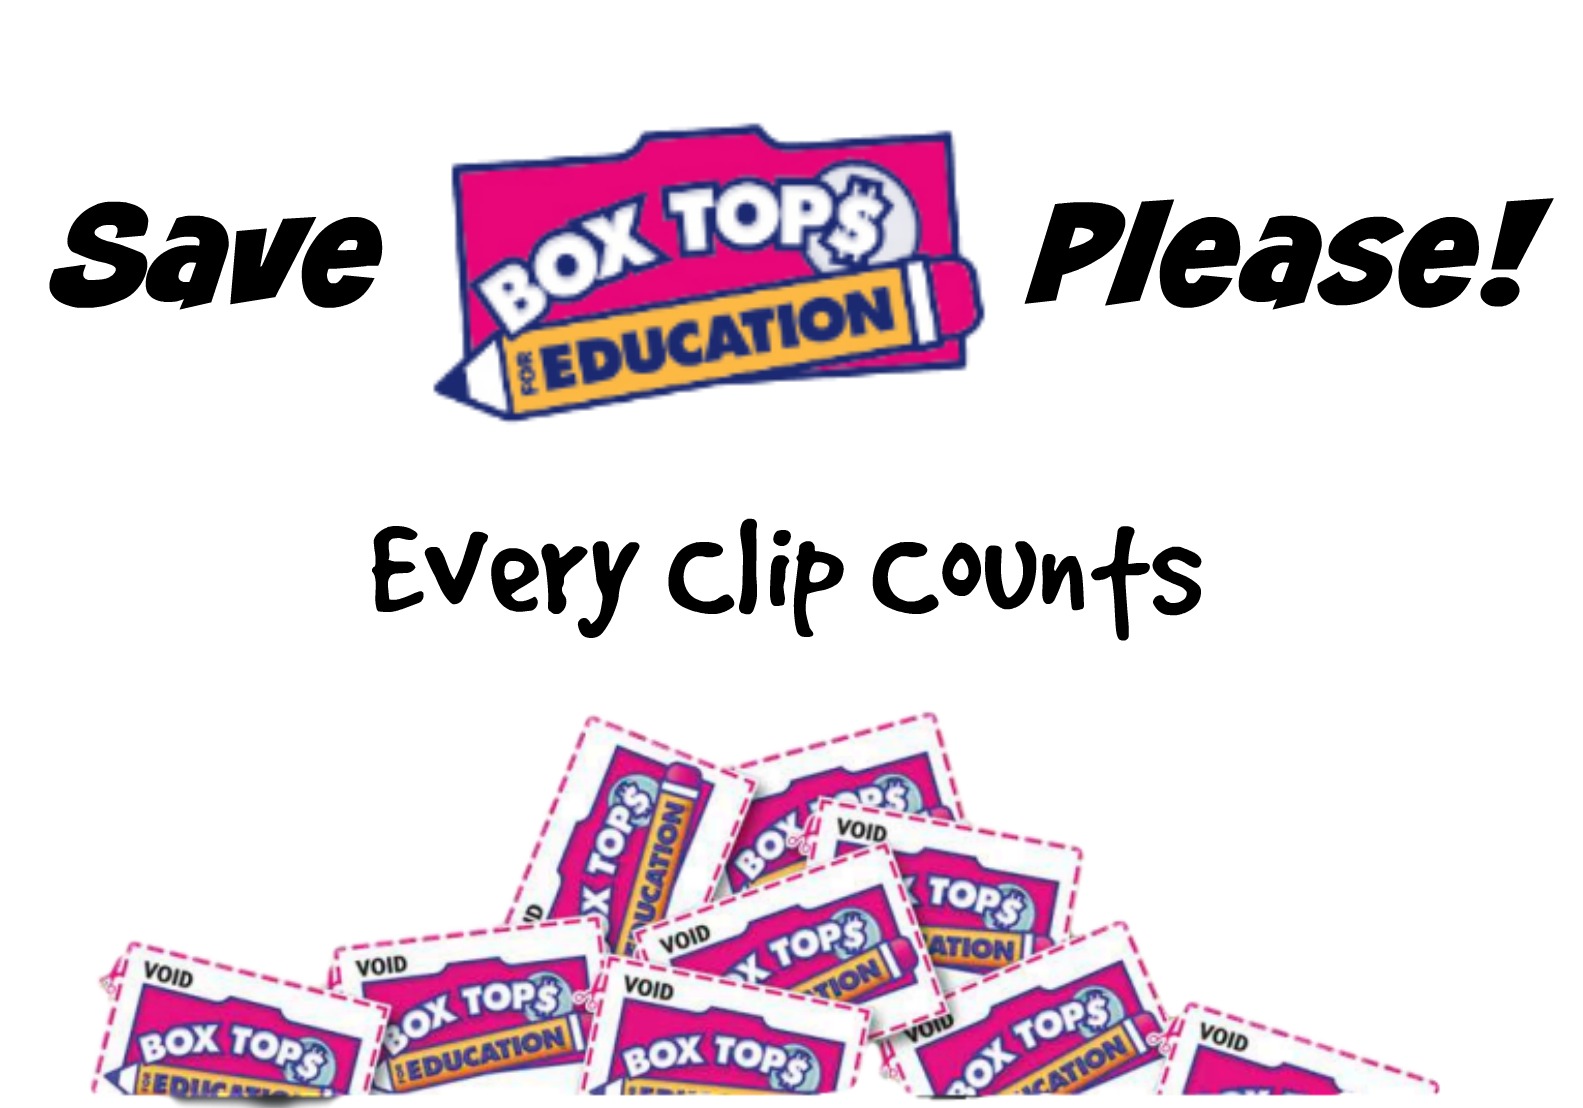 Image result for box tops for education